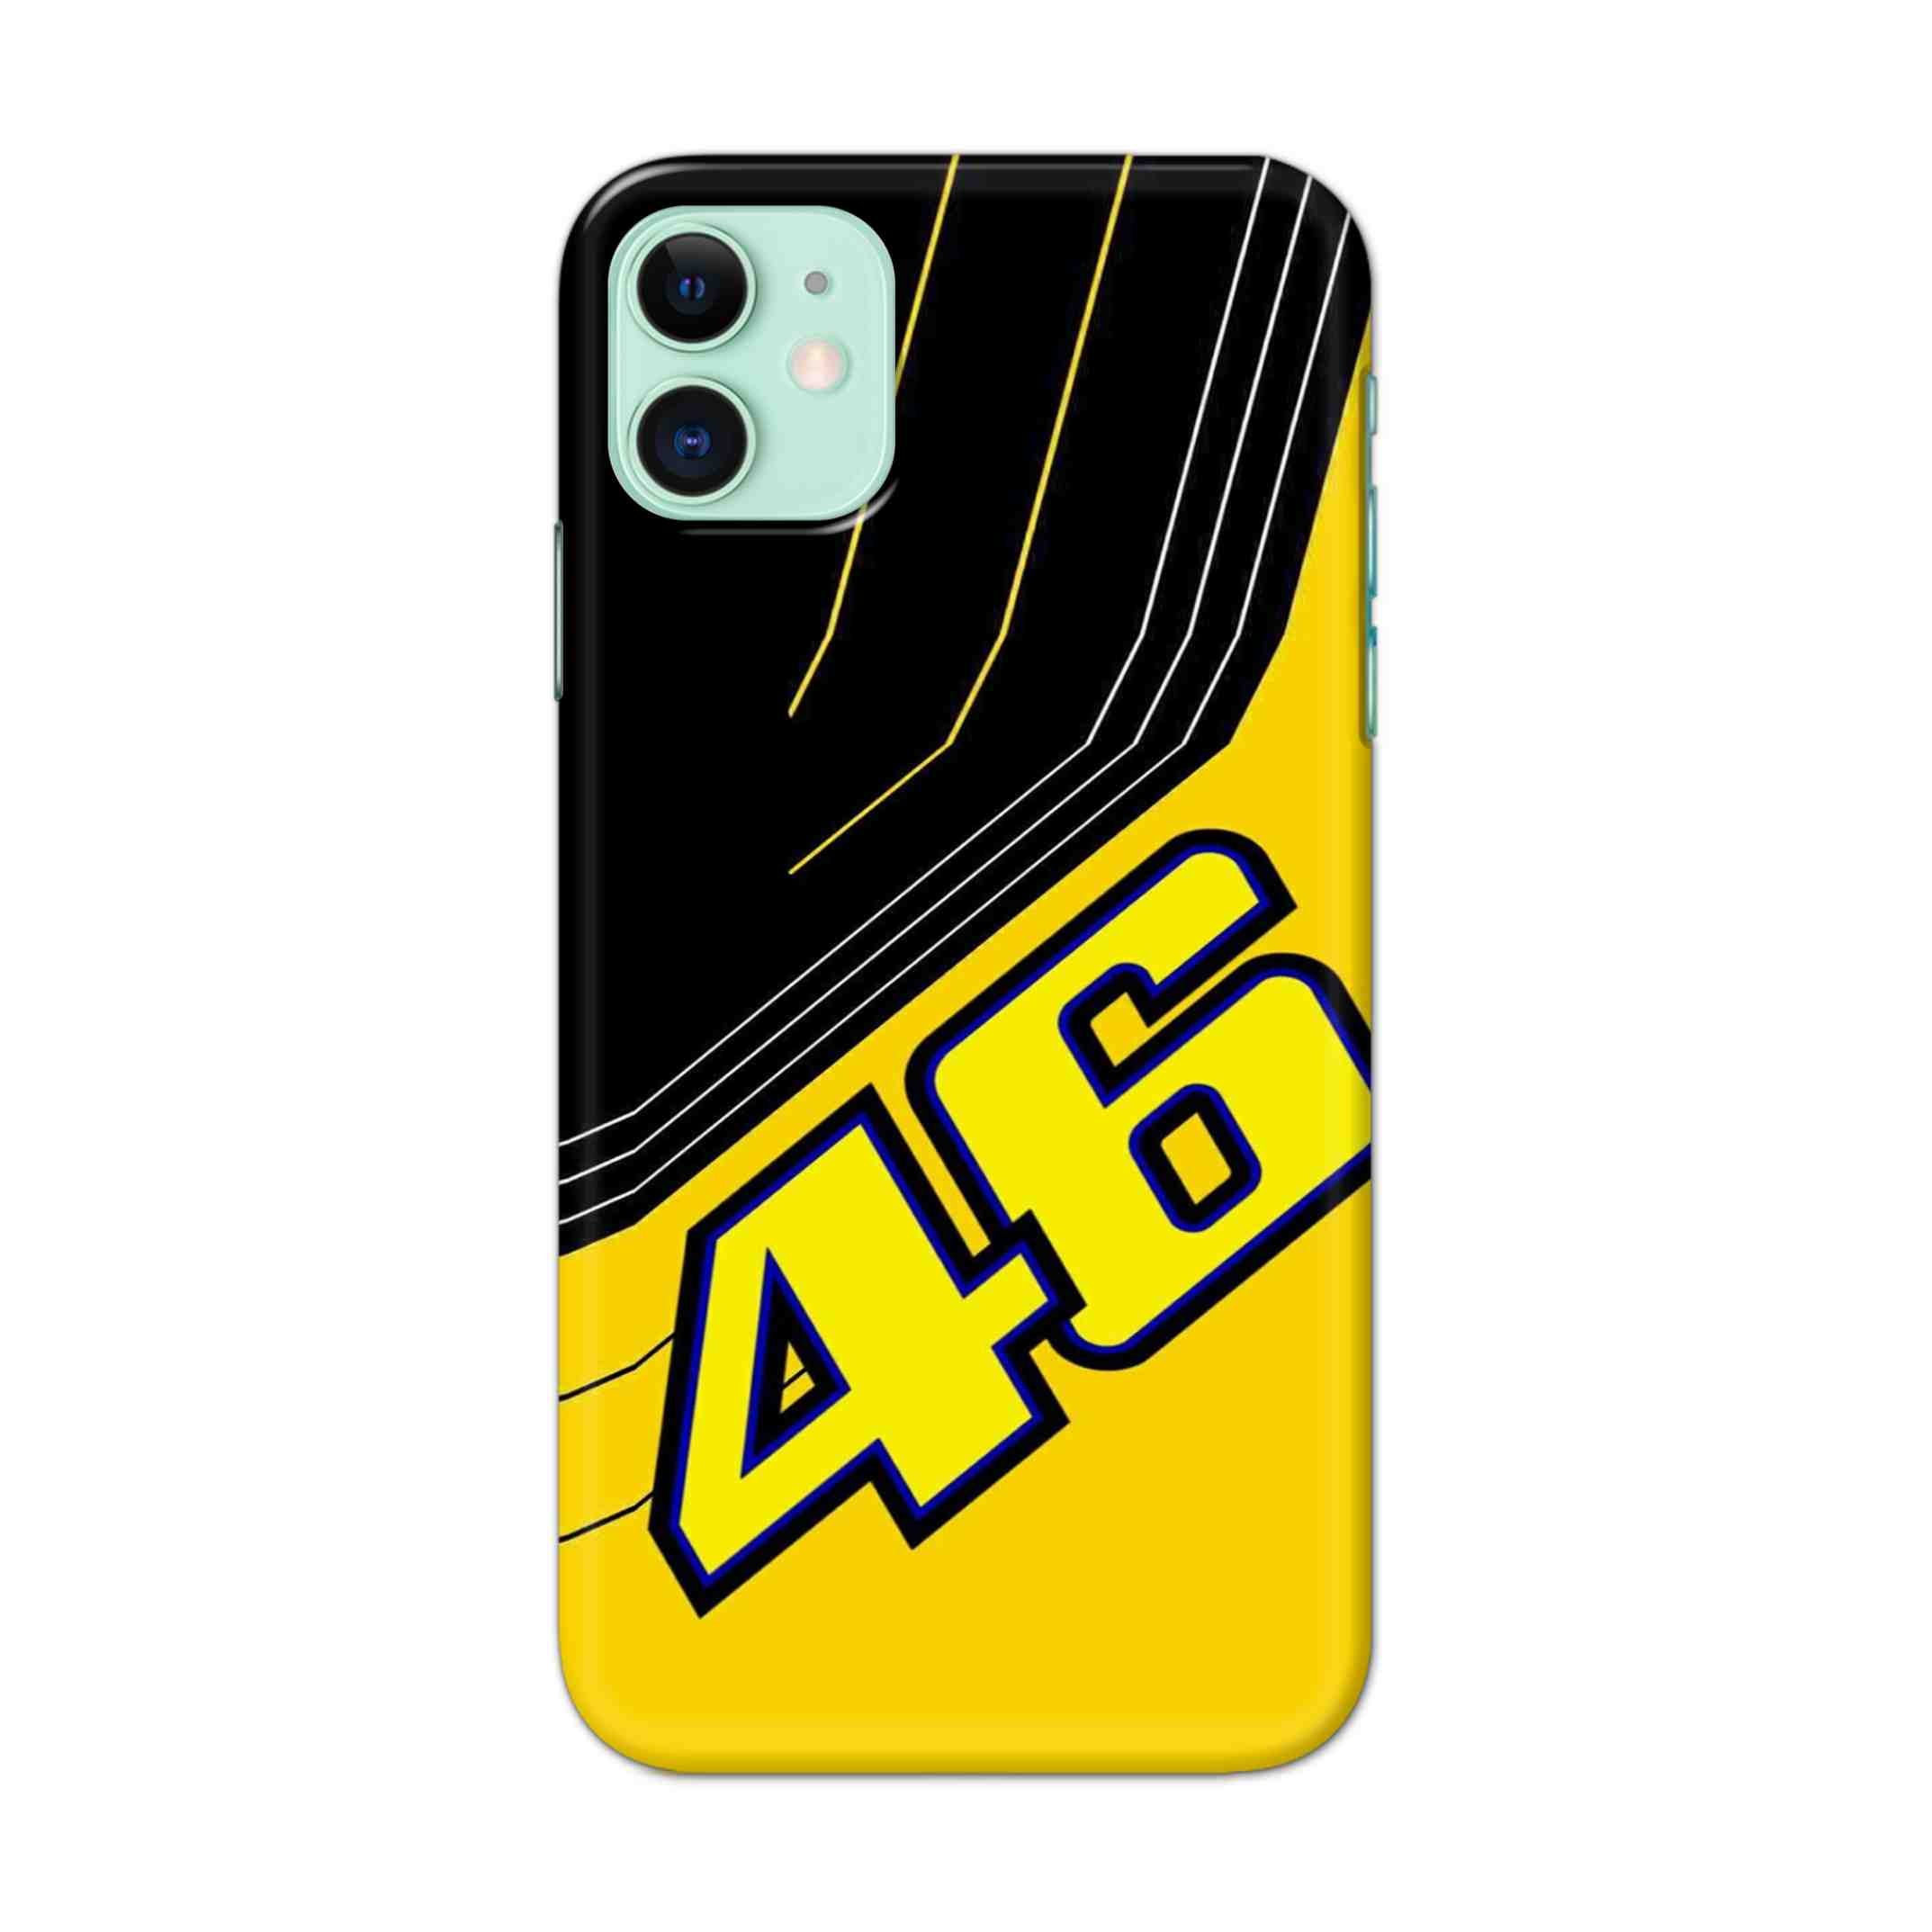 Buy 46 Hard Back Mobile Phone Case/Cover For iPhone 11 Online